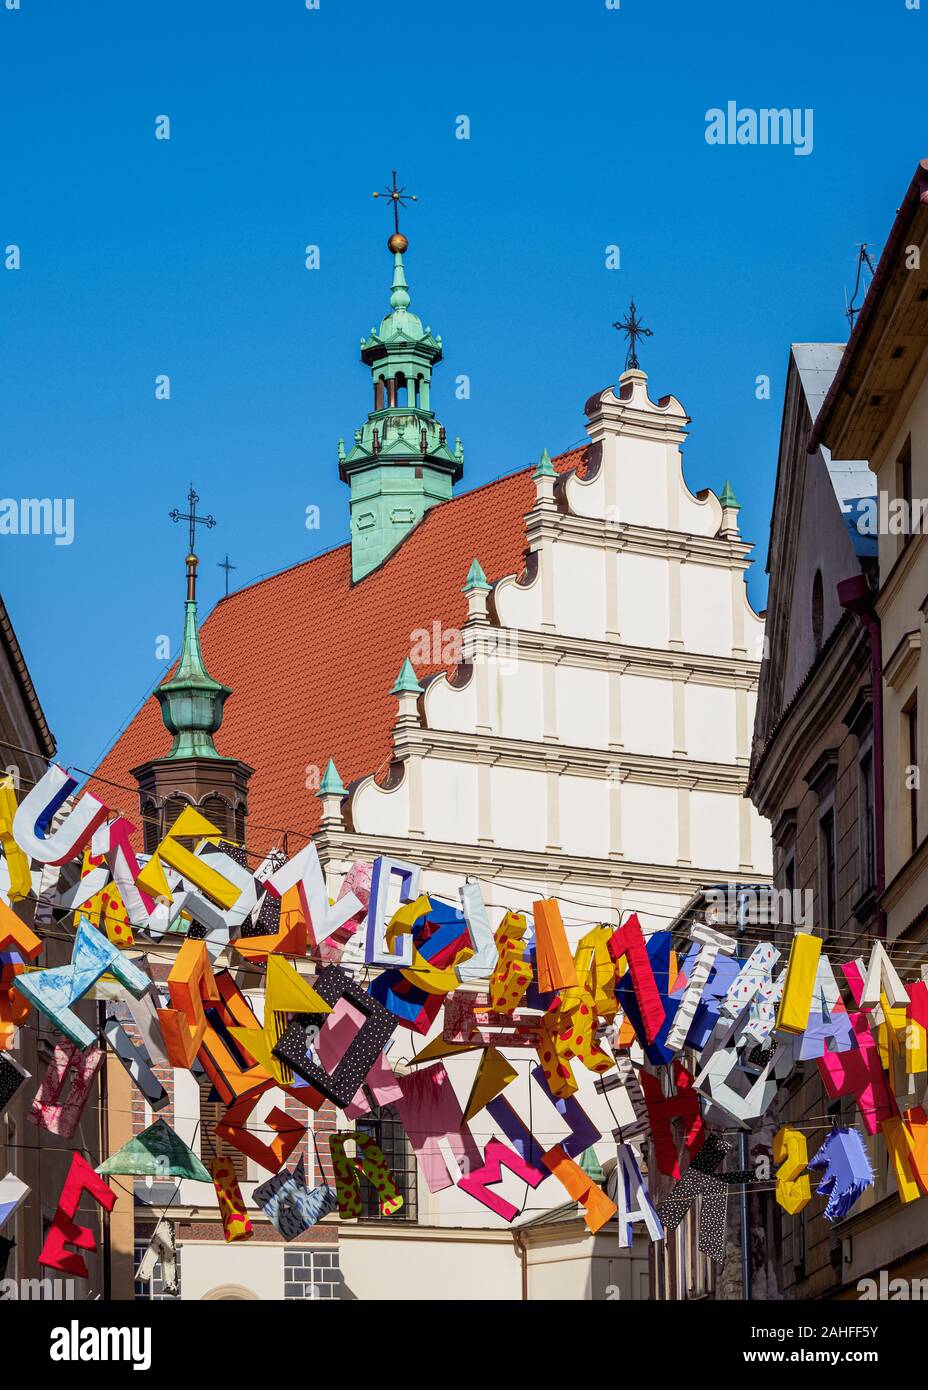 Art Instalation at the Old Town, Dominican Priory in the background, Lublin, Lublin Voivodeship, Poland Stock Photo